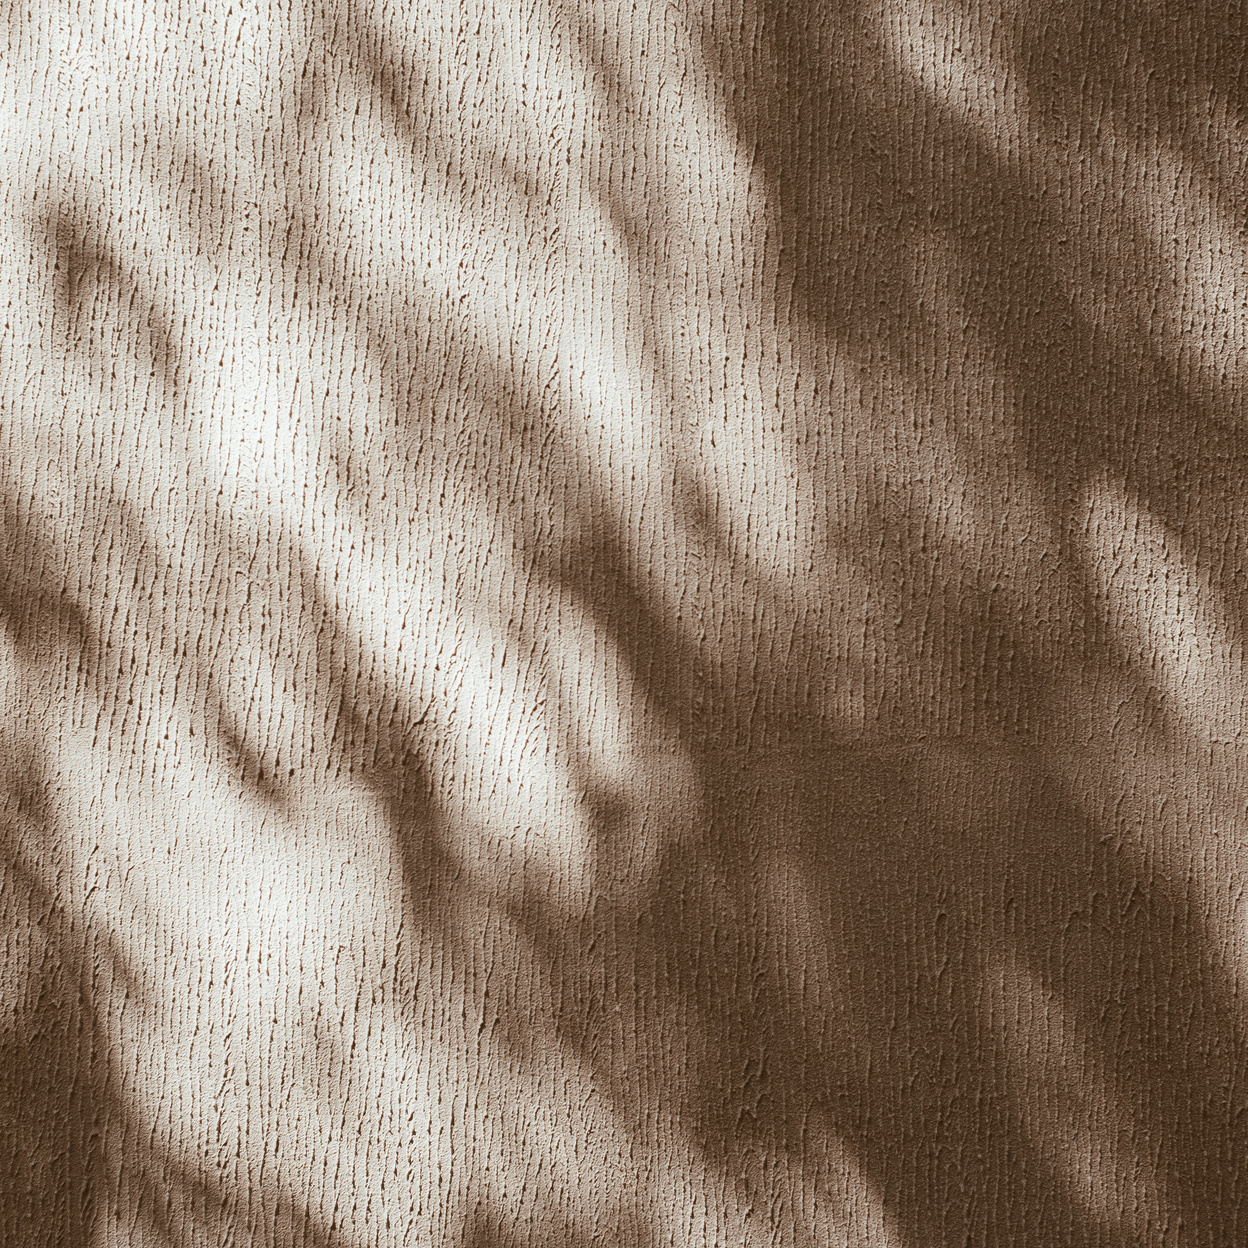 Shadow of Leaves on the Wall 